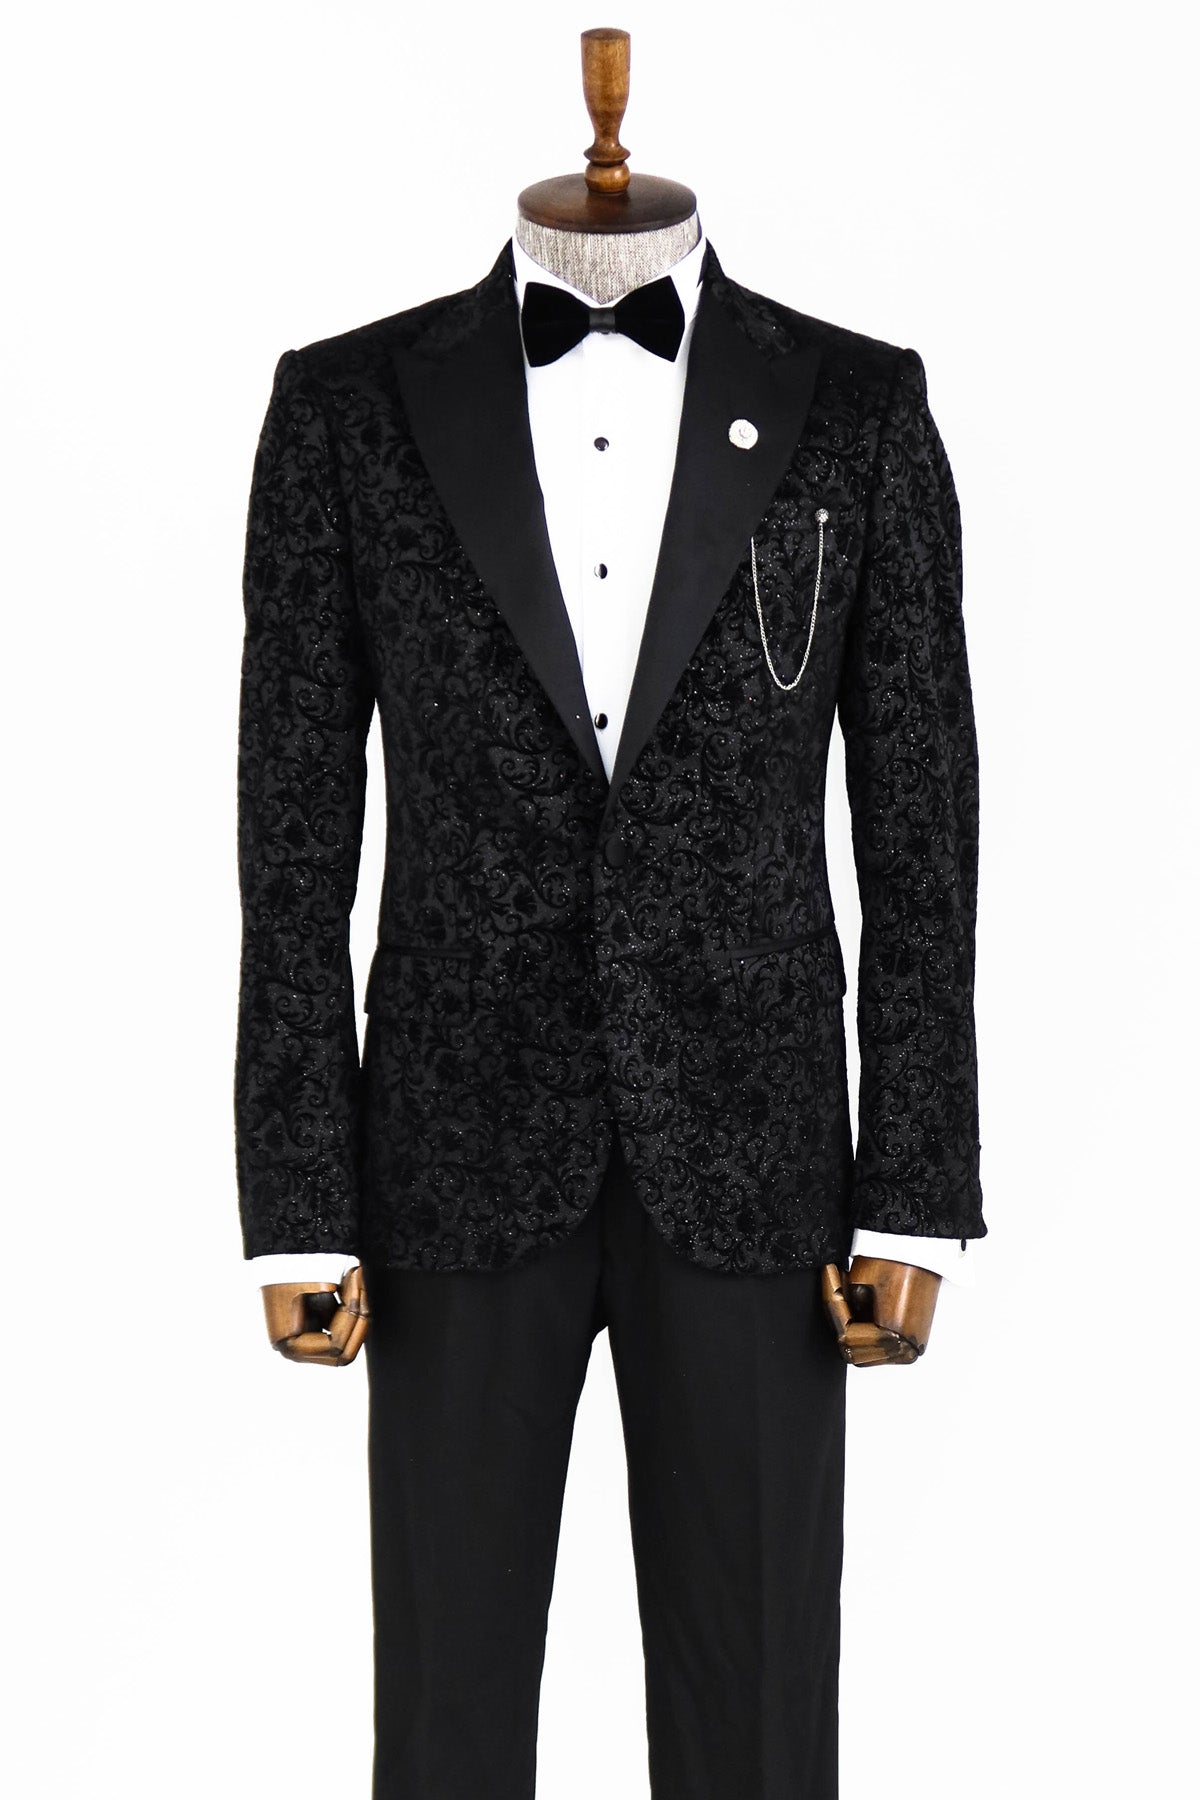 KCT Menswear's Floral Sparkle Black Prom Blazer - Perfect for Prom ...